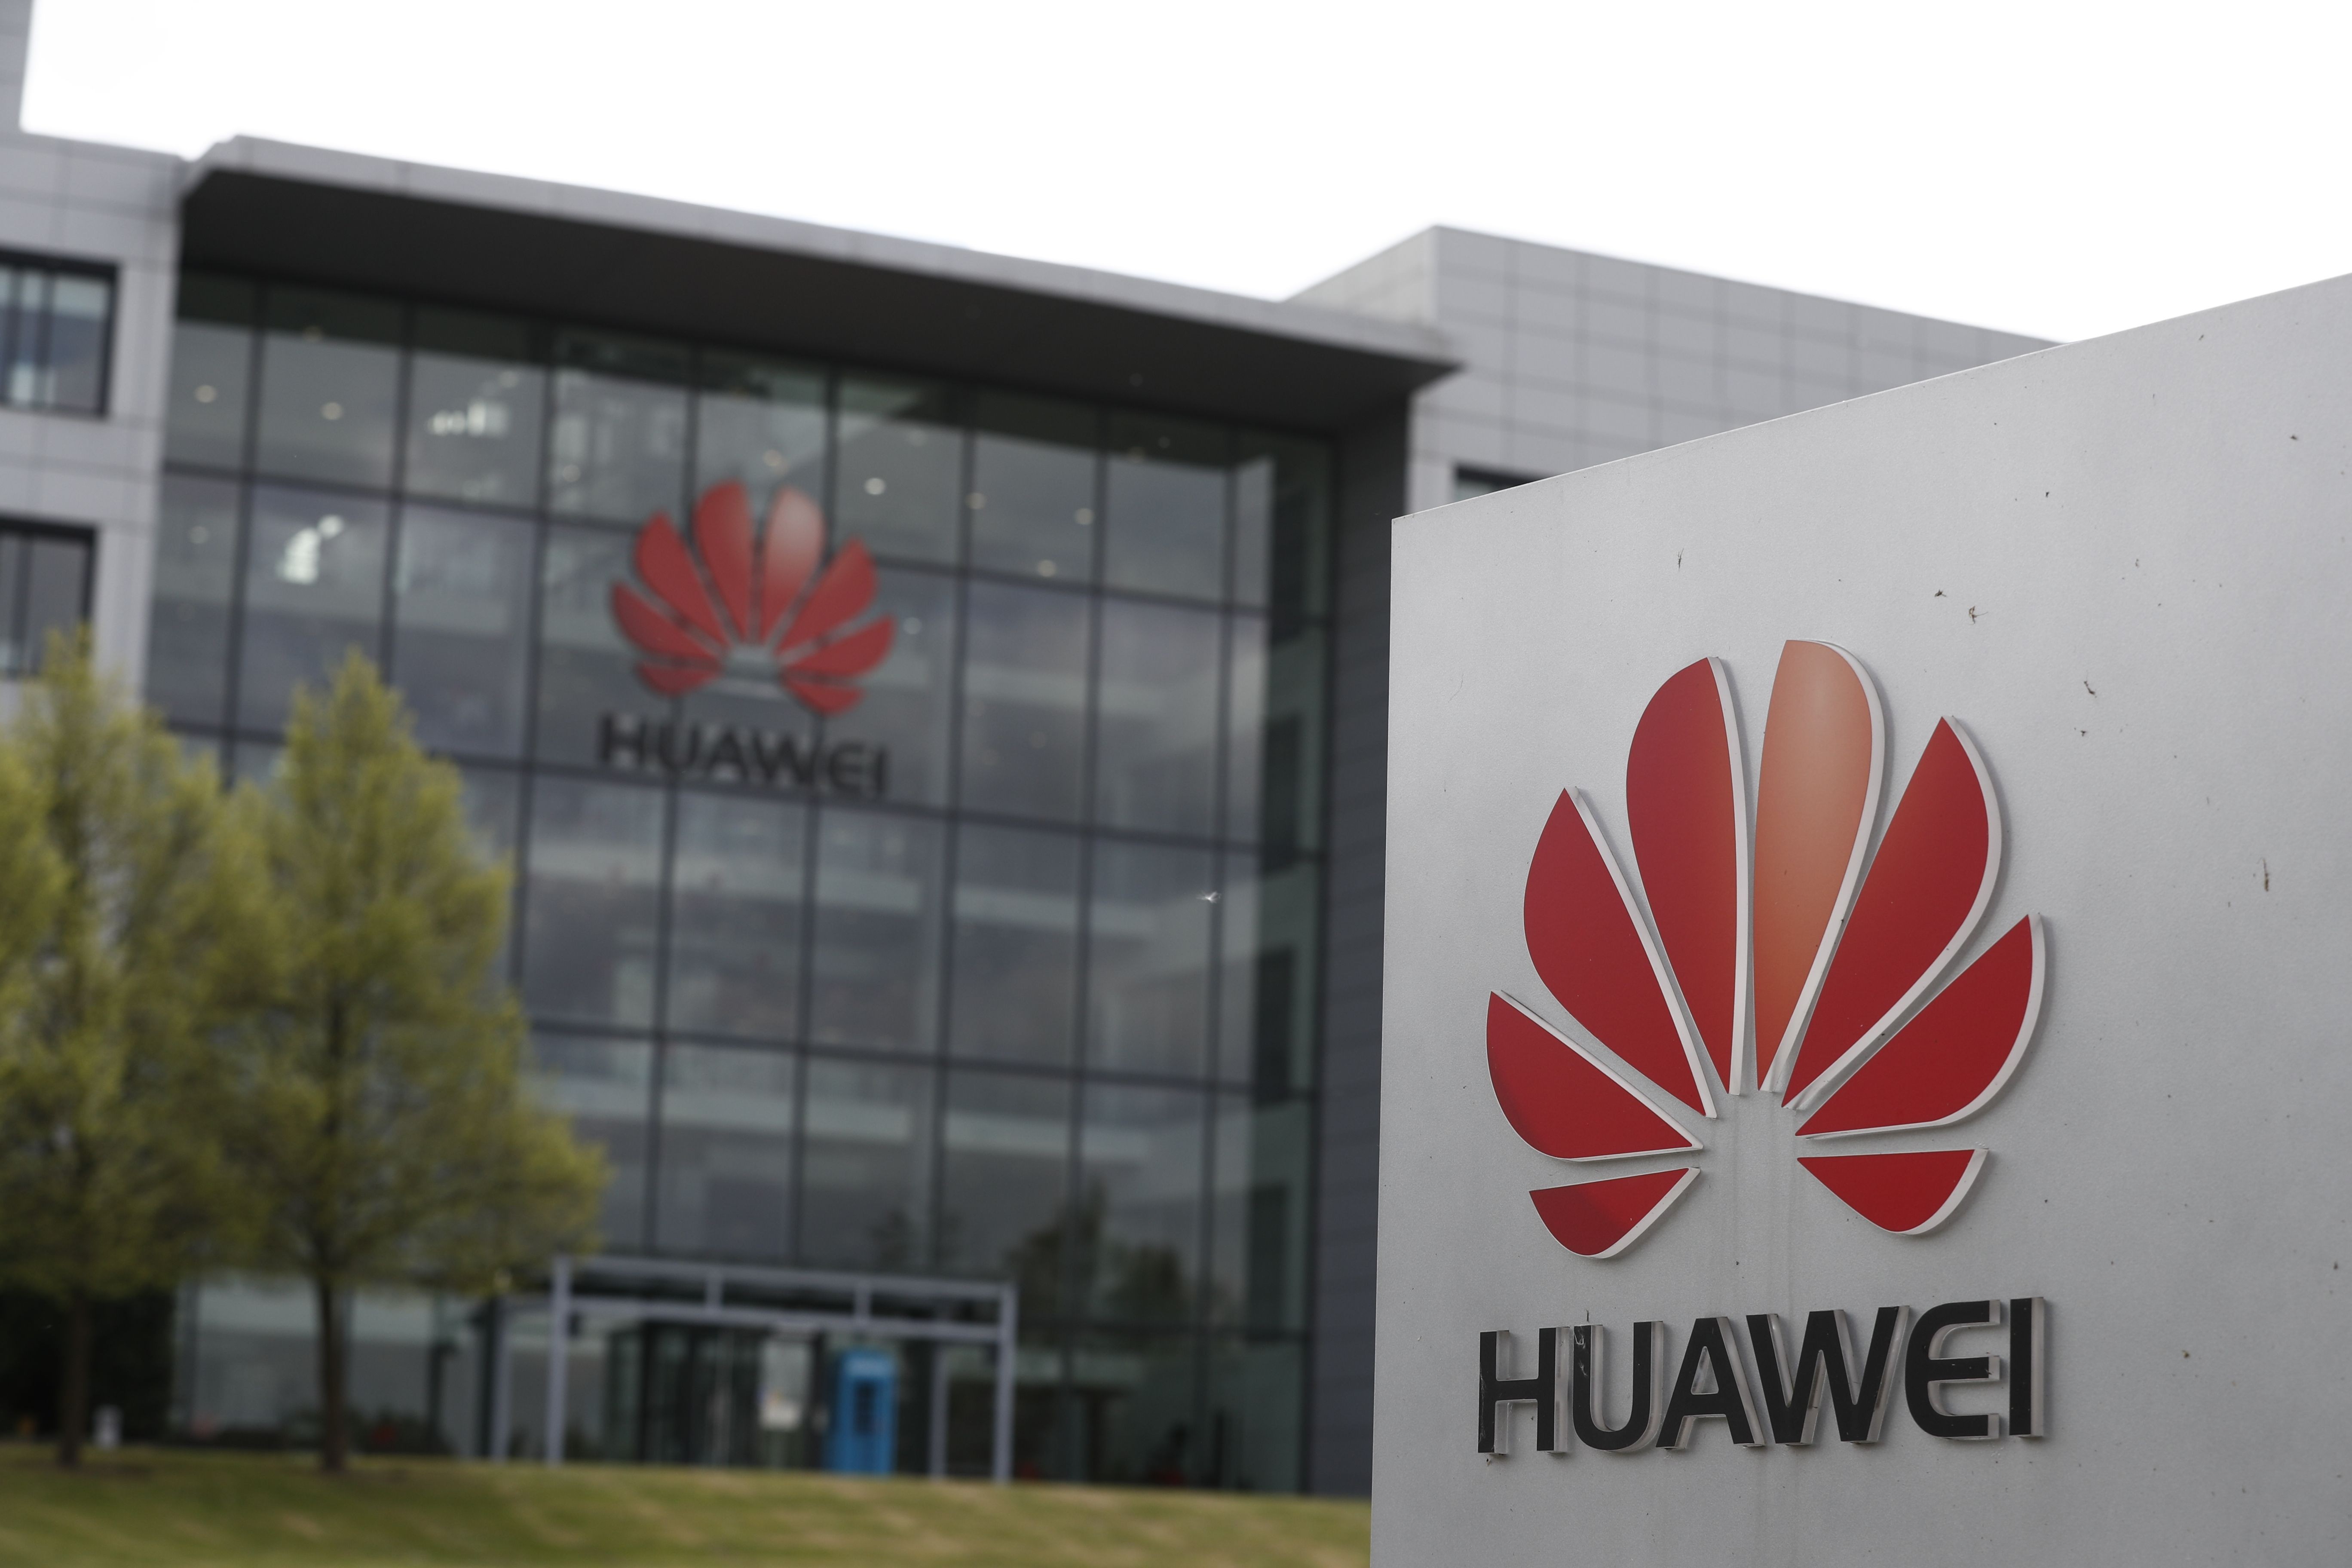 Trump administration meeting to hammer out differences over Huawei export  curbs, sources say | South China Morning Post